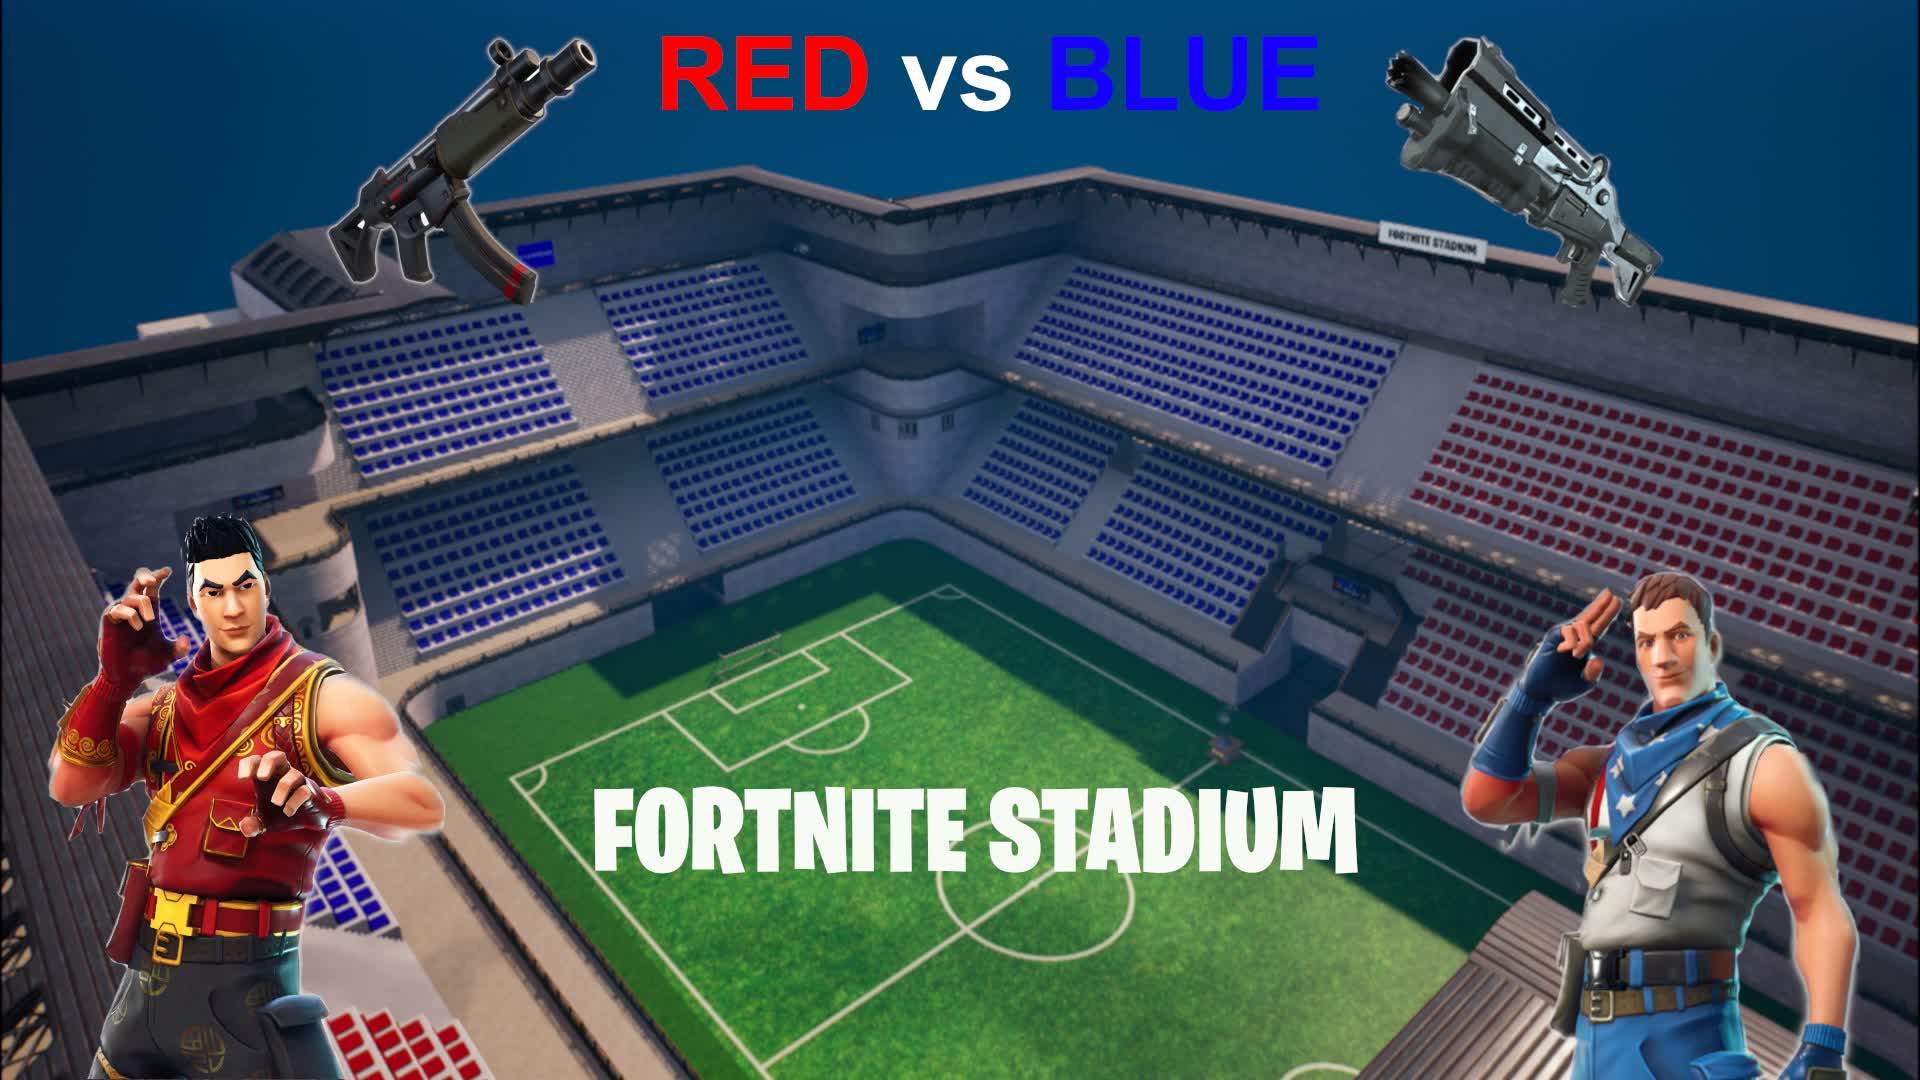 Final Cup Stadium - RED vs BLUE ⚽